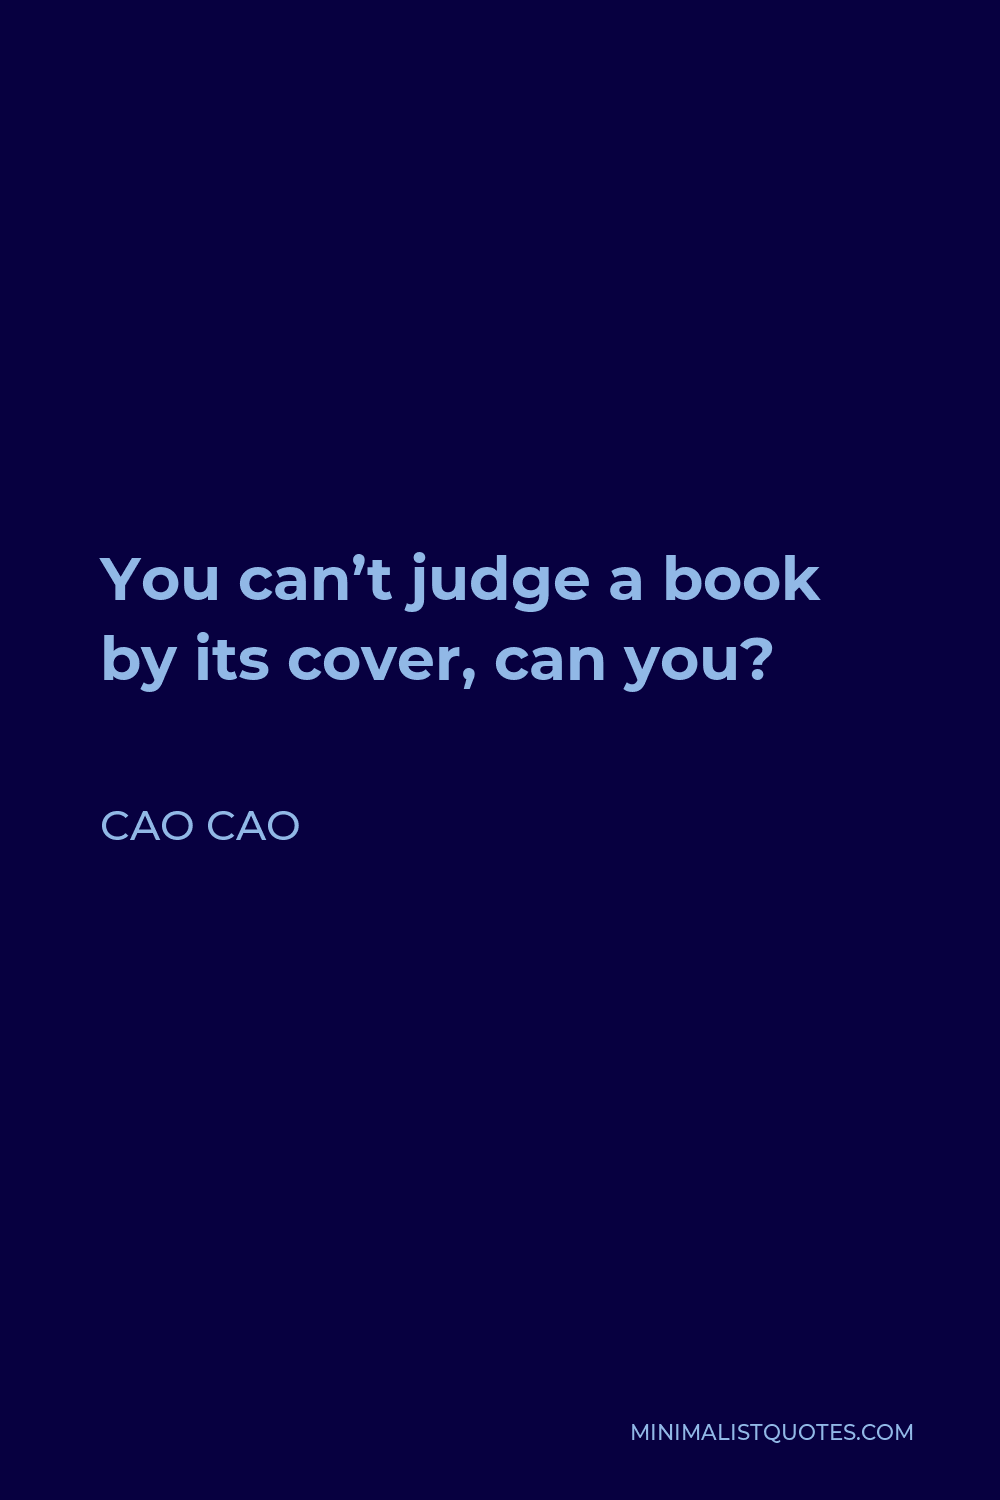 Cao Cao Quote - You can’t judge a book by its cover, can you?